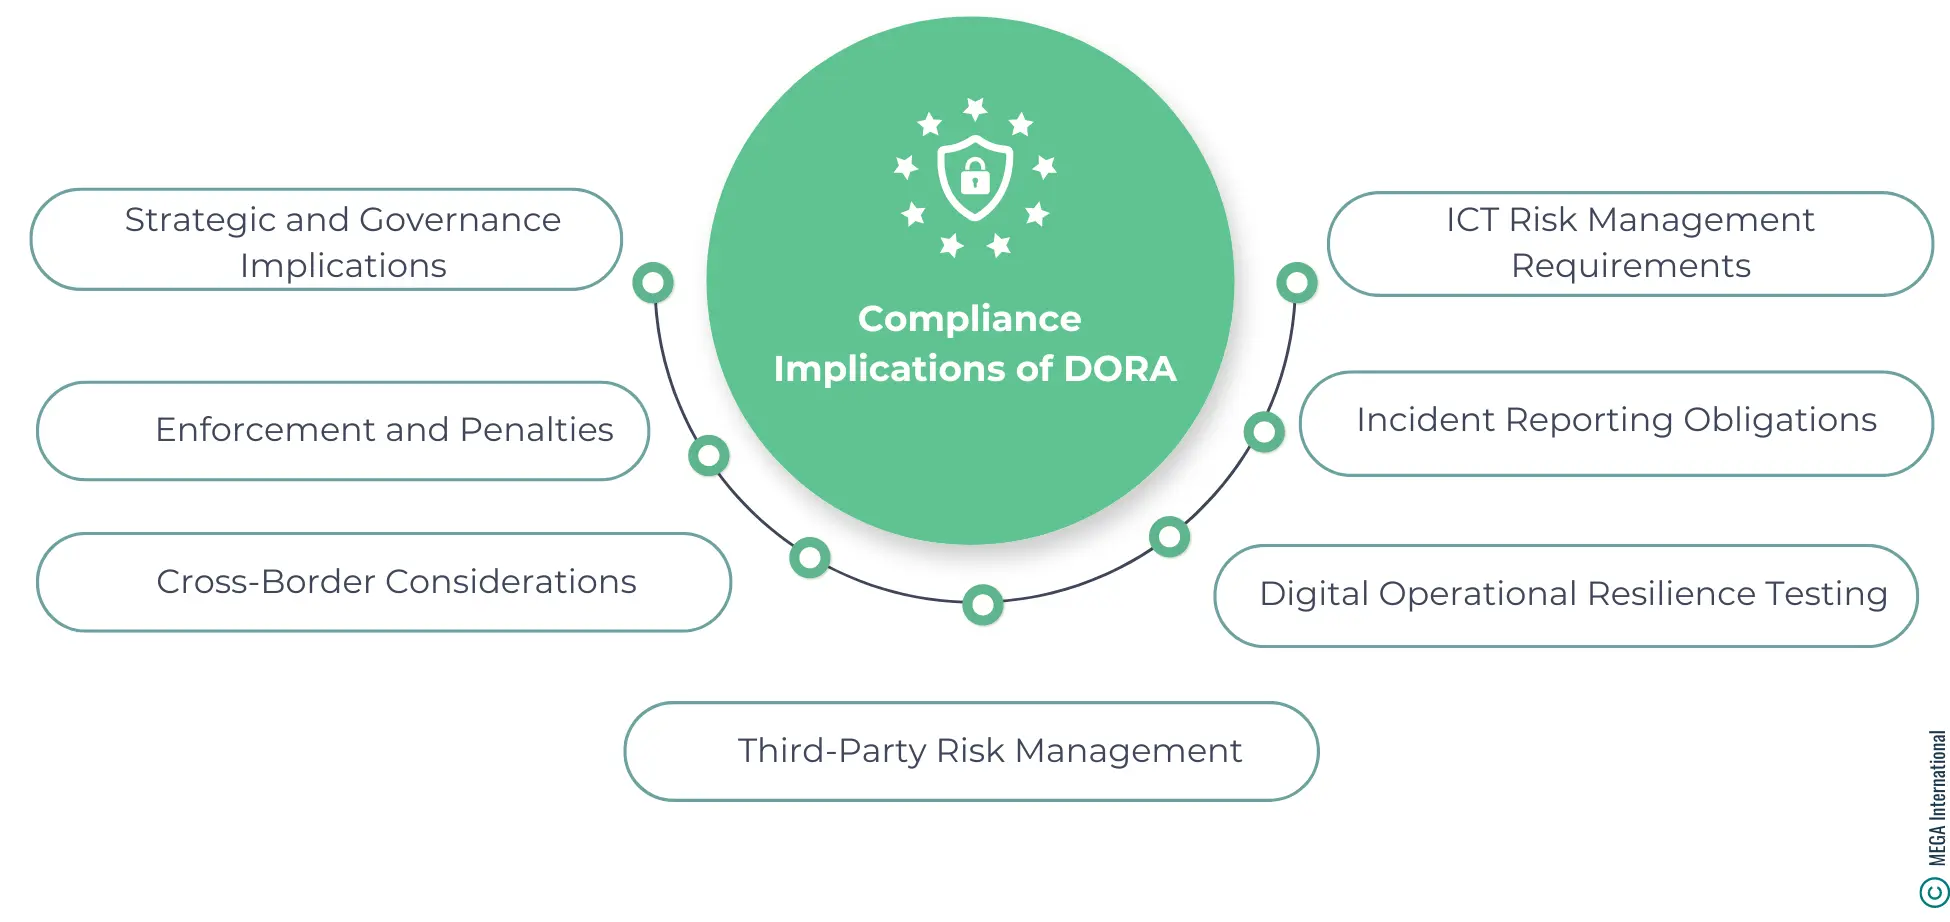 The Compliance Implications of DORA 